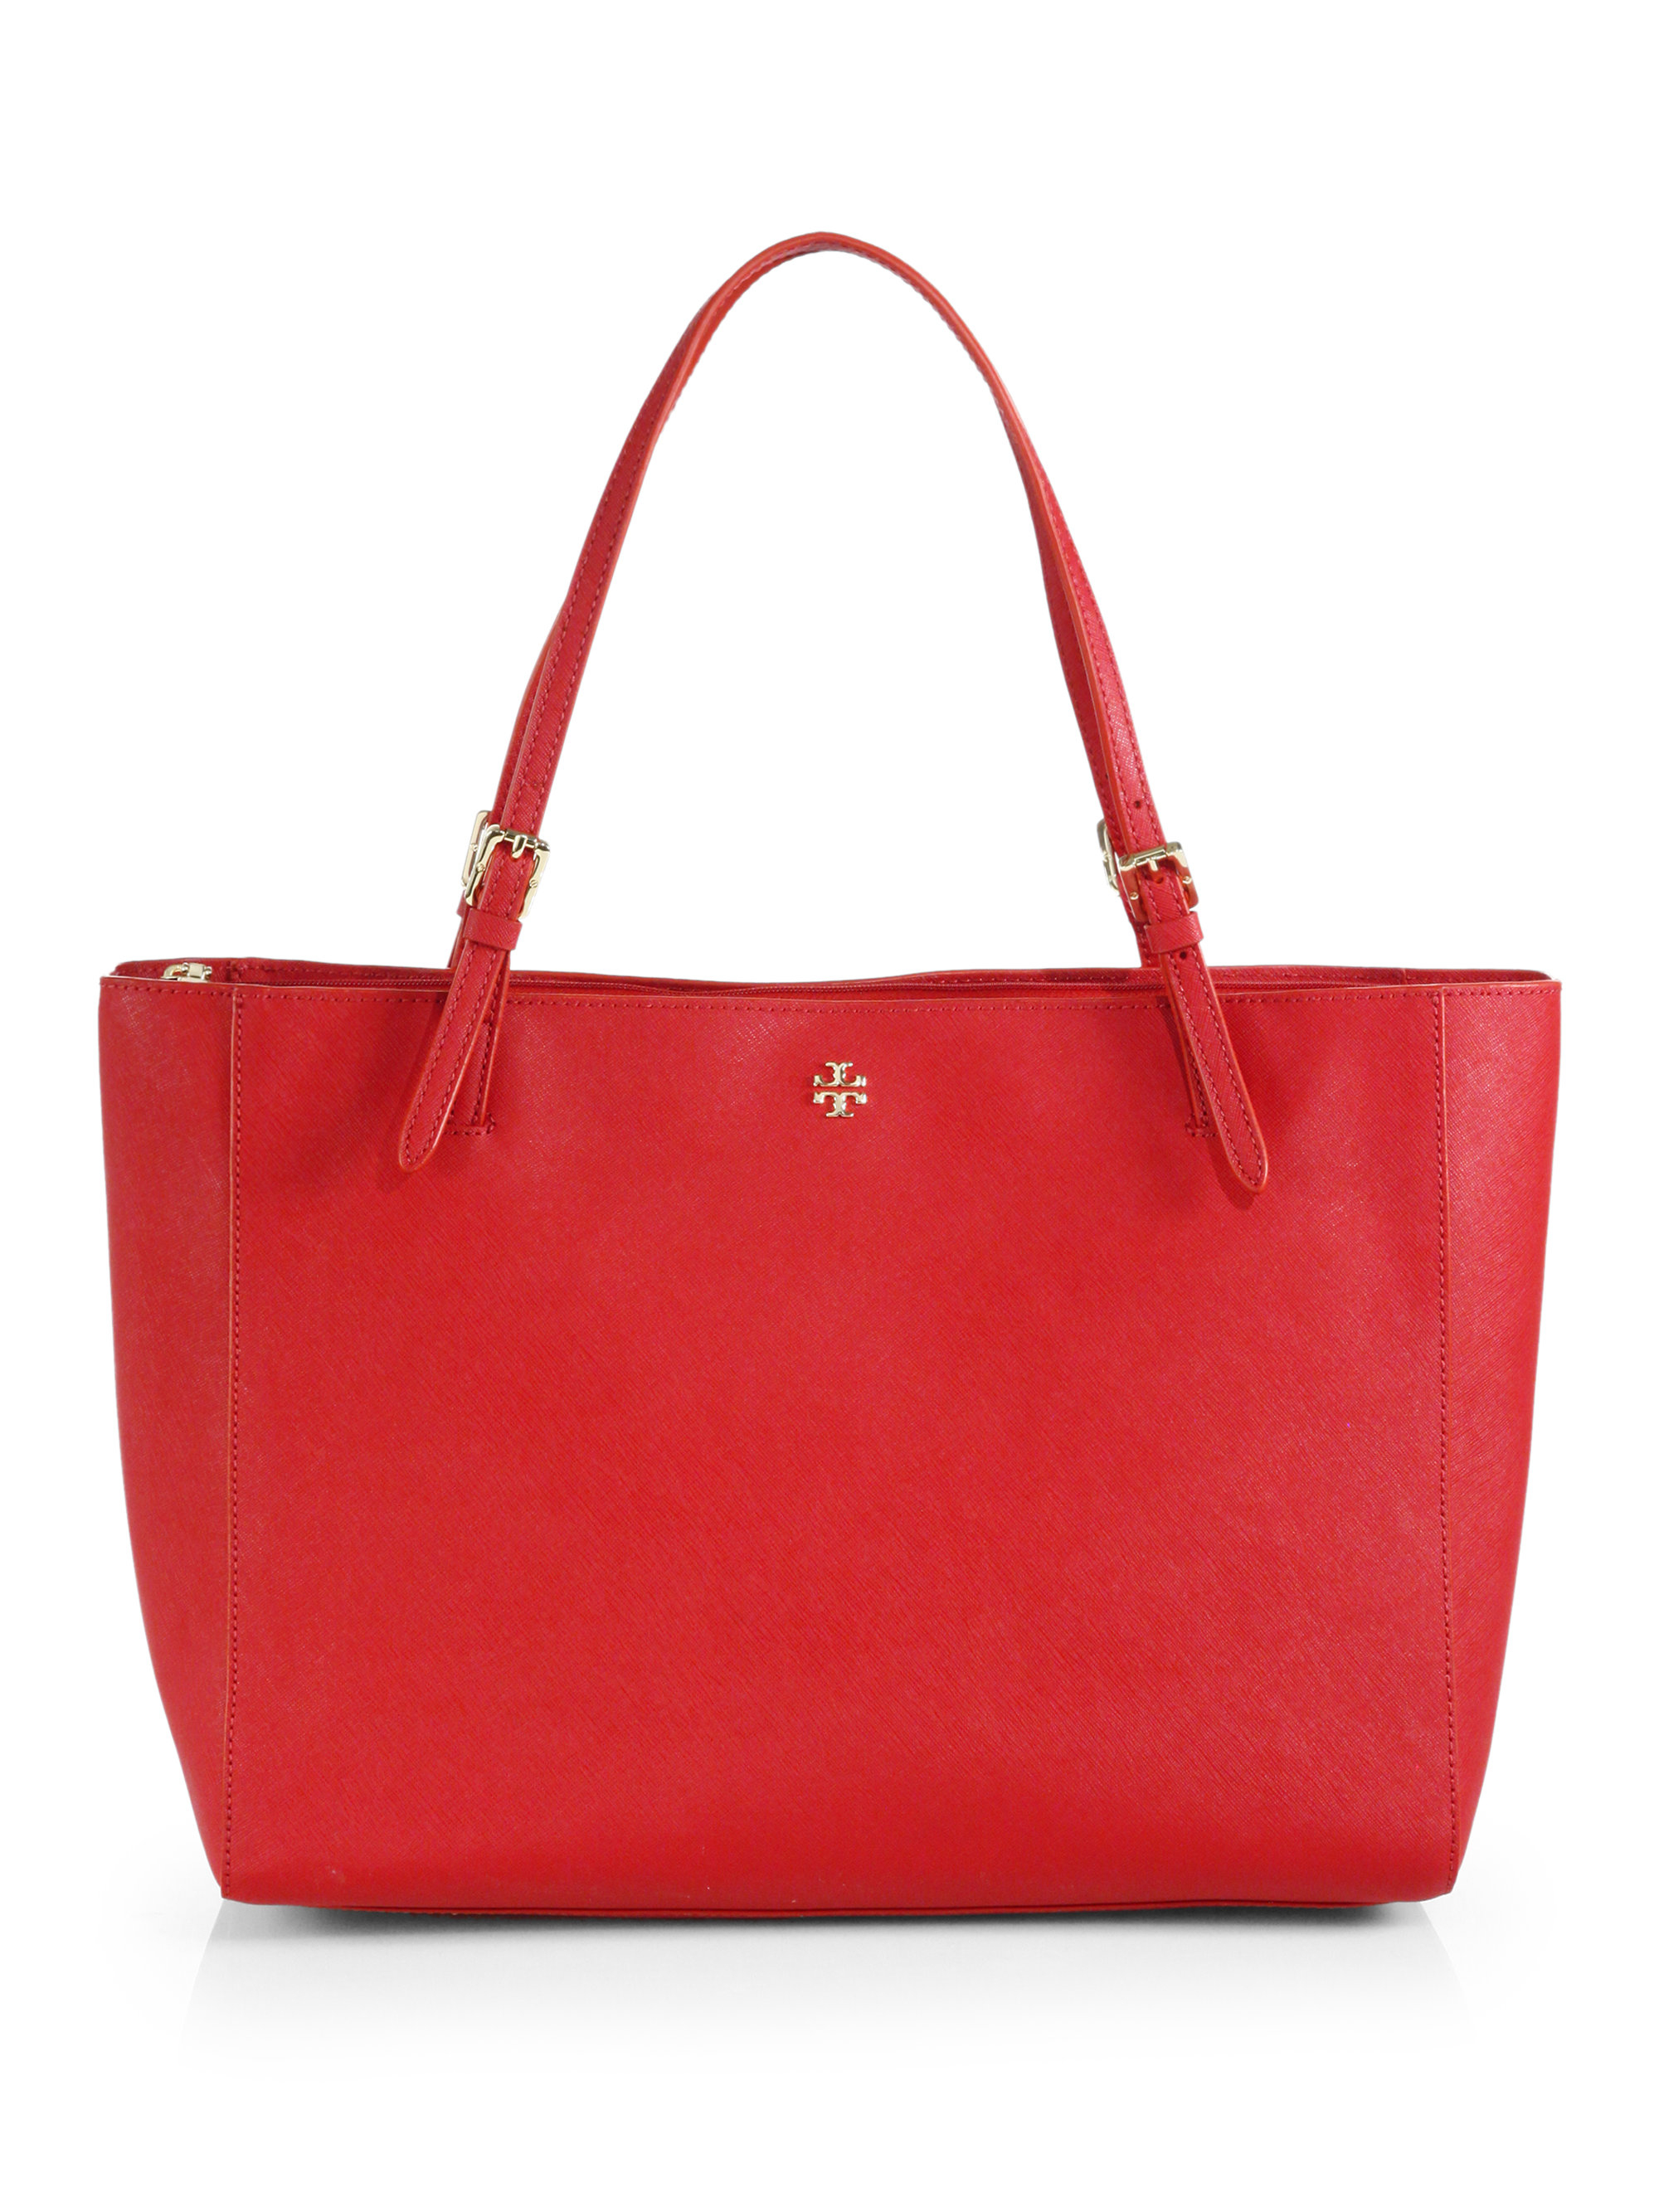 Tory burch York Buckle Tote in Red | Lyst